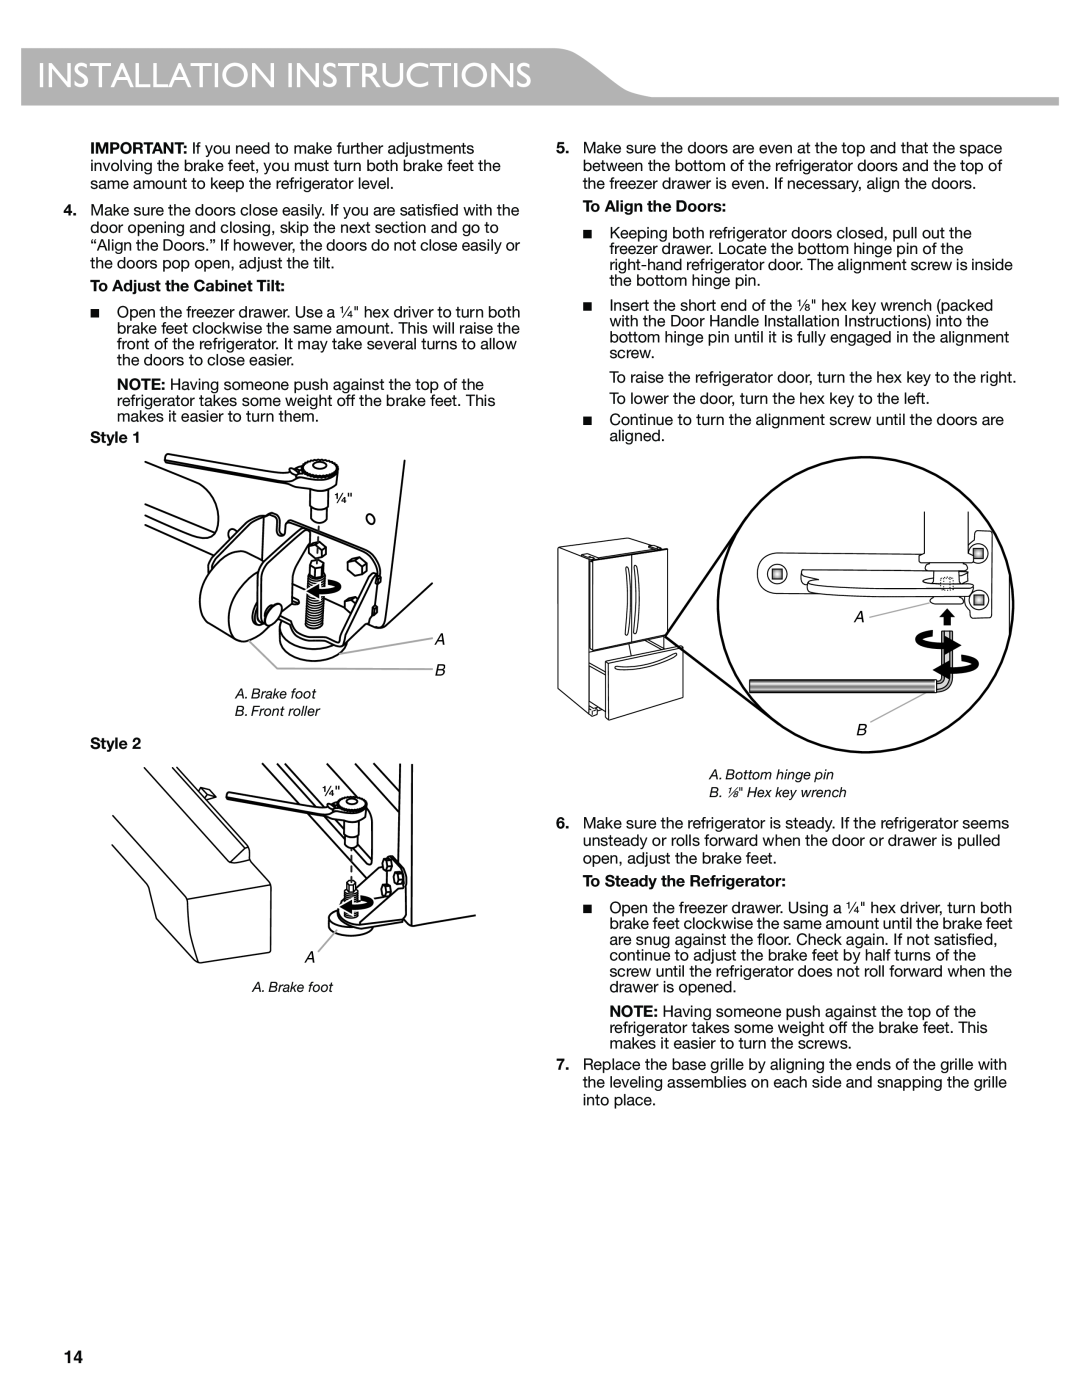 KitchenAid W10417002A manual To Adjust the Cabinet Tilt, Style, To Align the Doors, To Steady the Refrigerator 